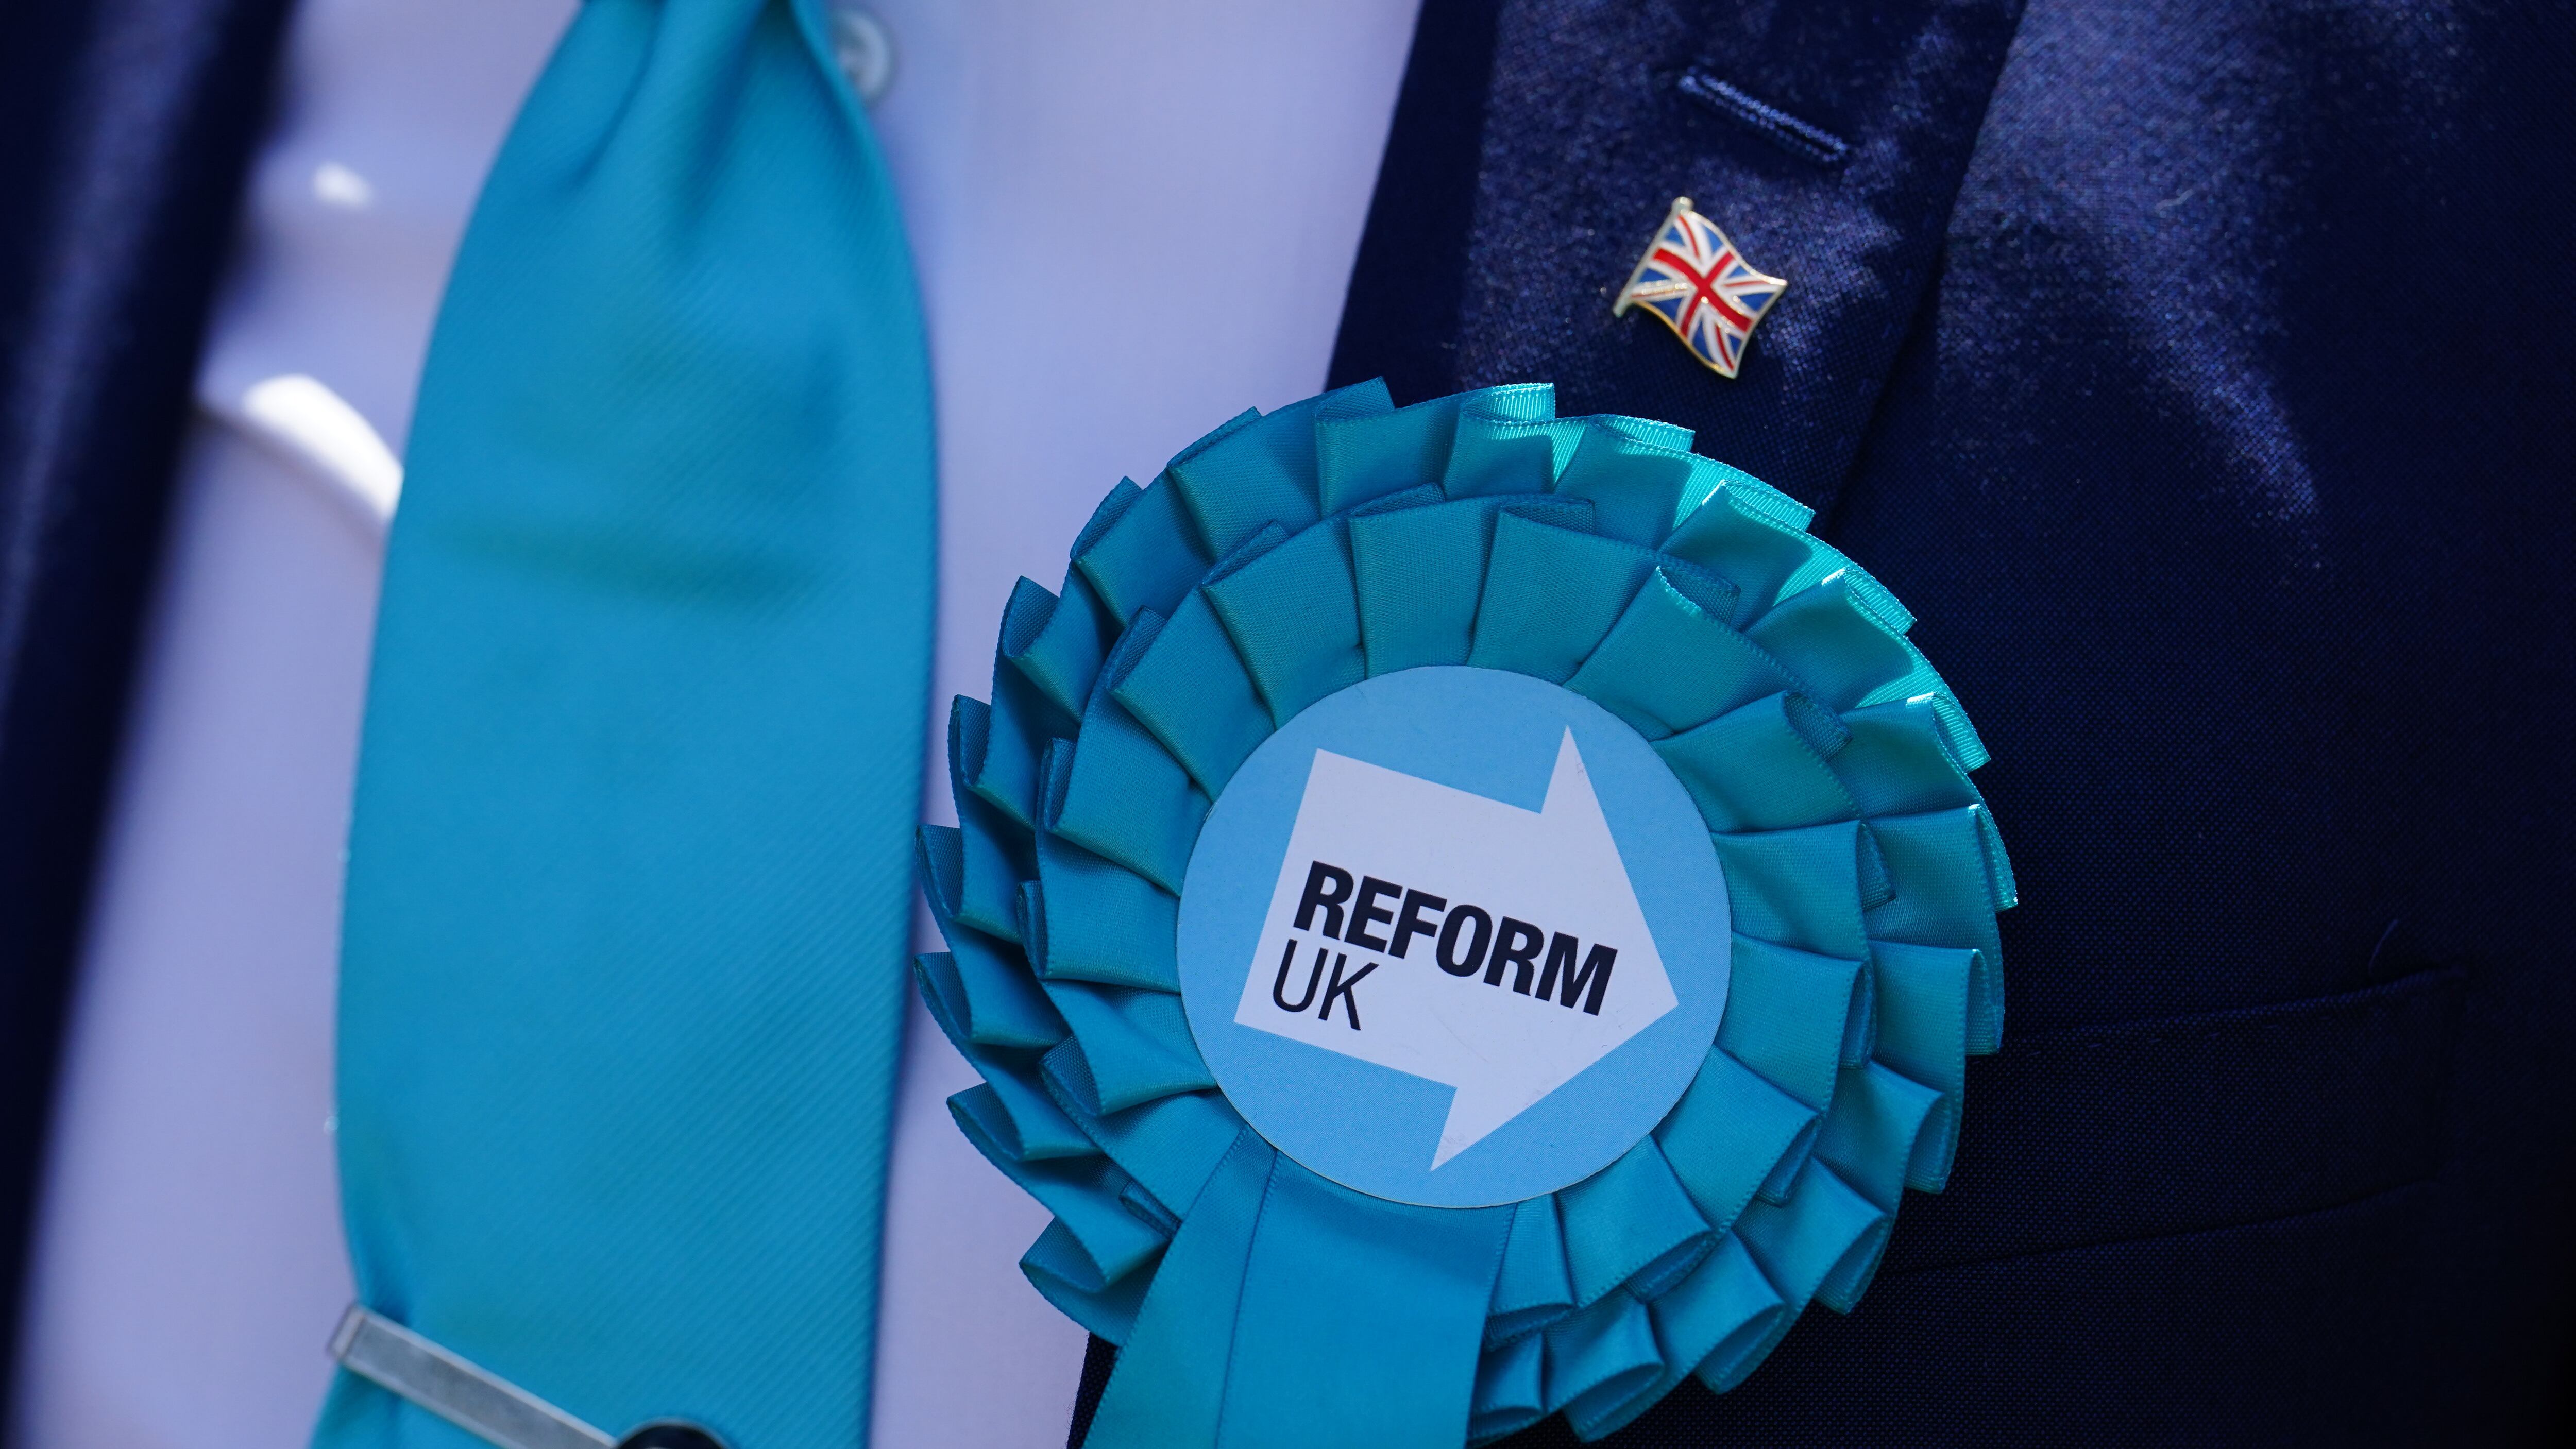 Reform has been plagued by concerns about the views and opinions of several of its candidates